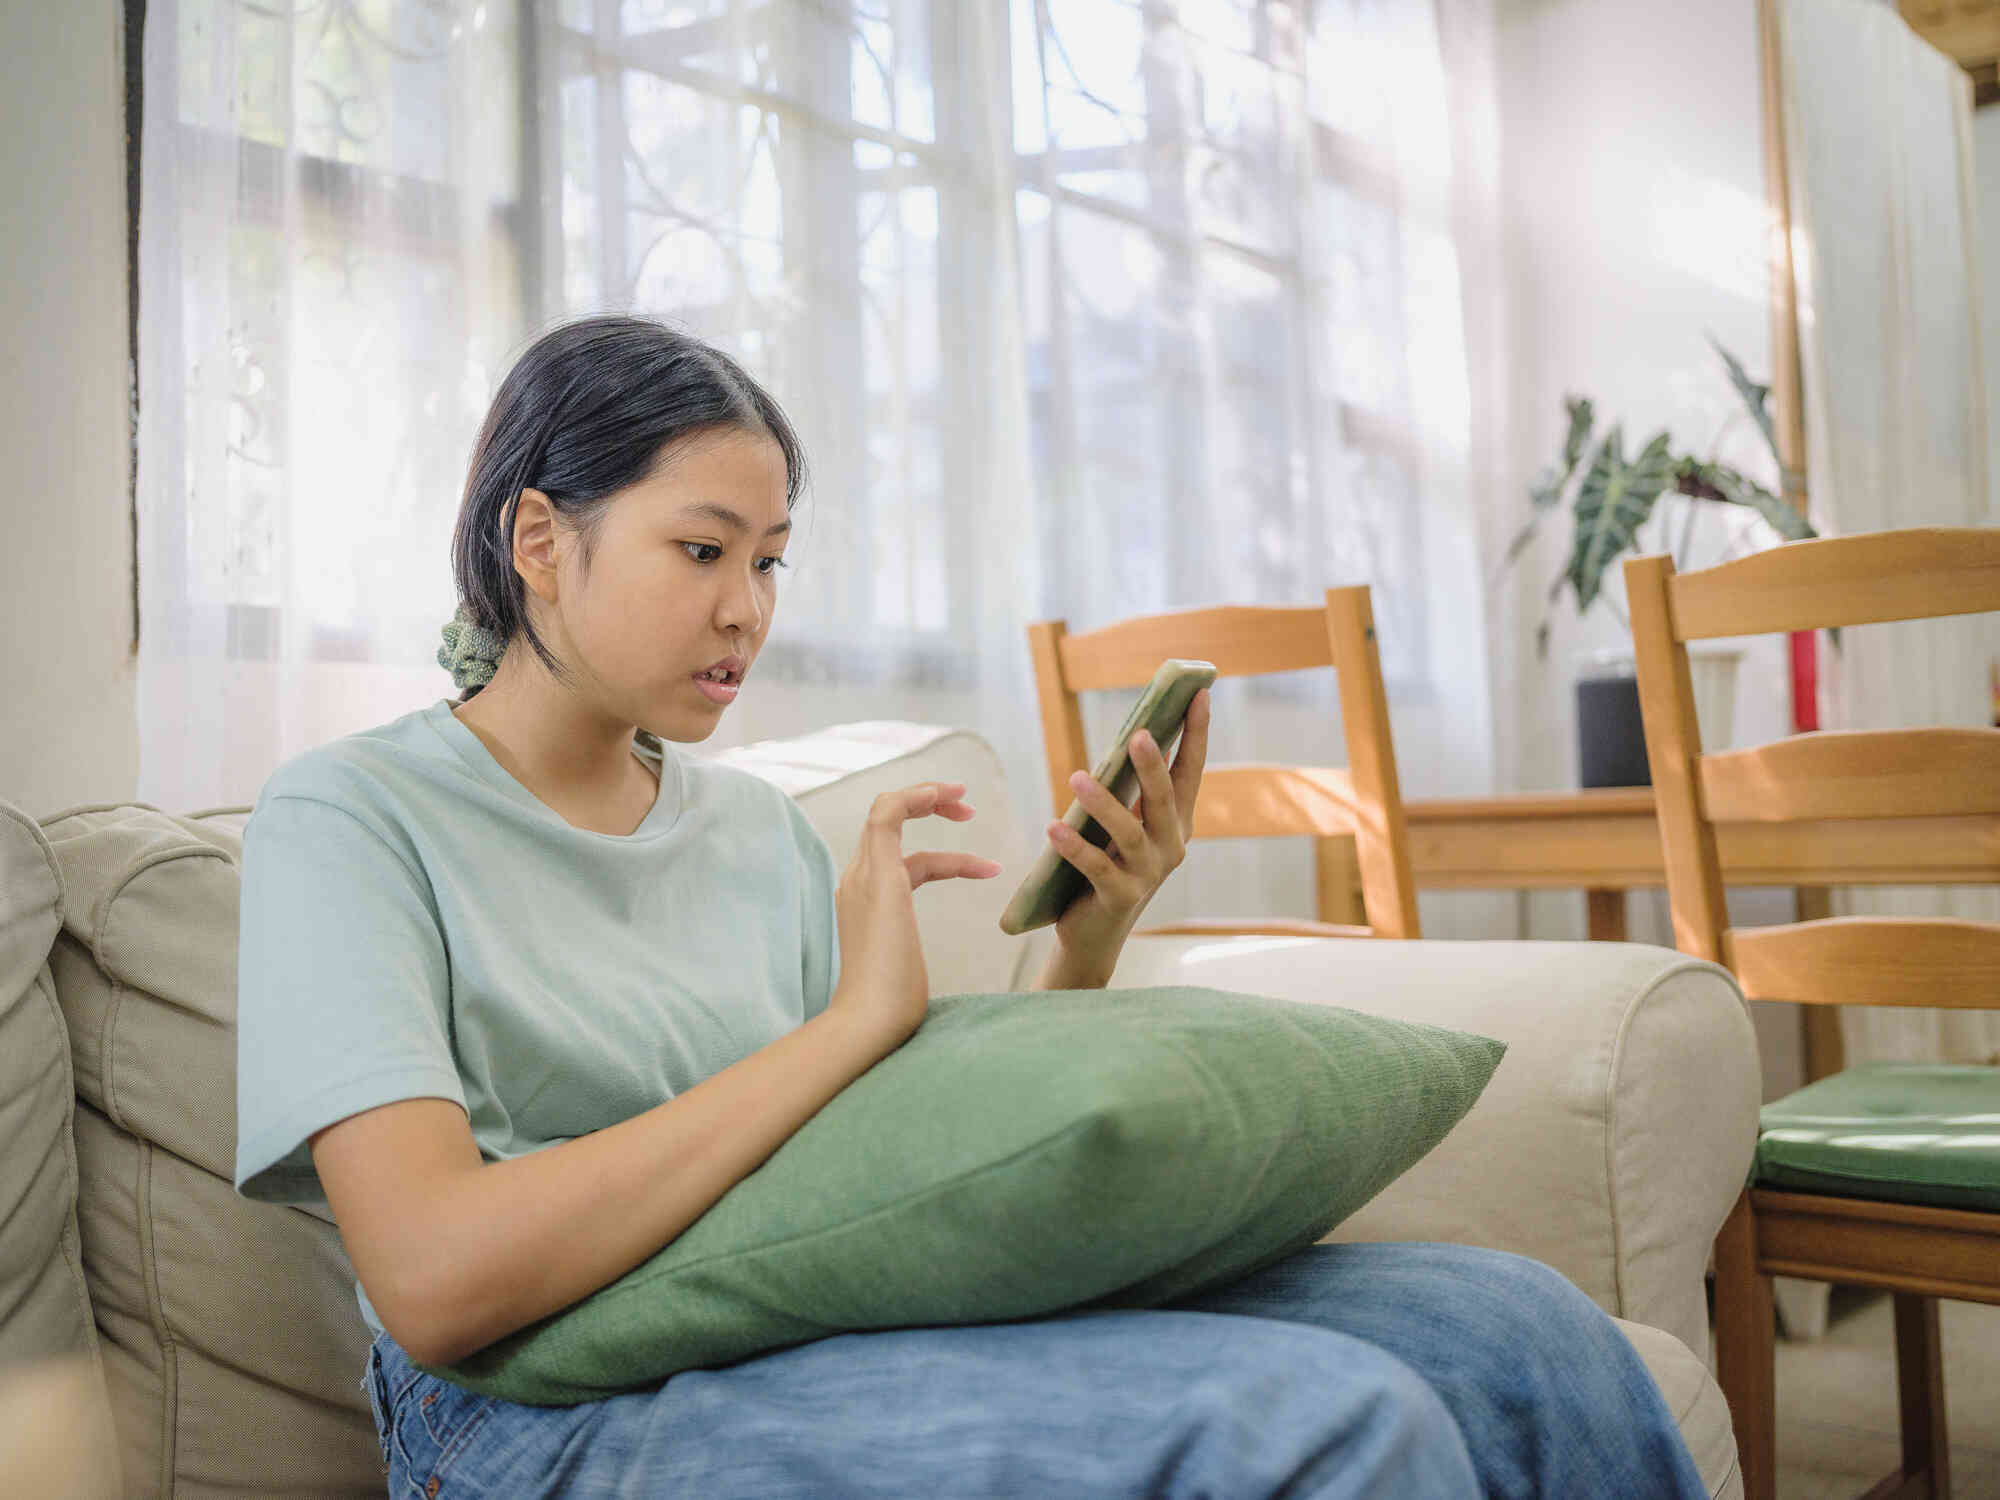 A teen girl sits on the couch with a green pillow in her lap as she looks at the phone in her hand with a worried expression.